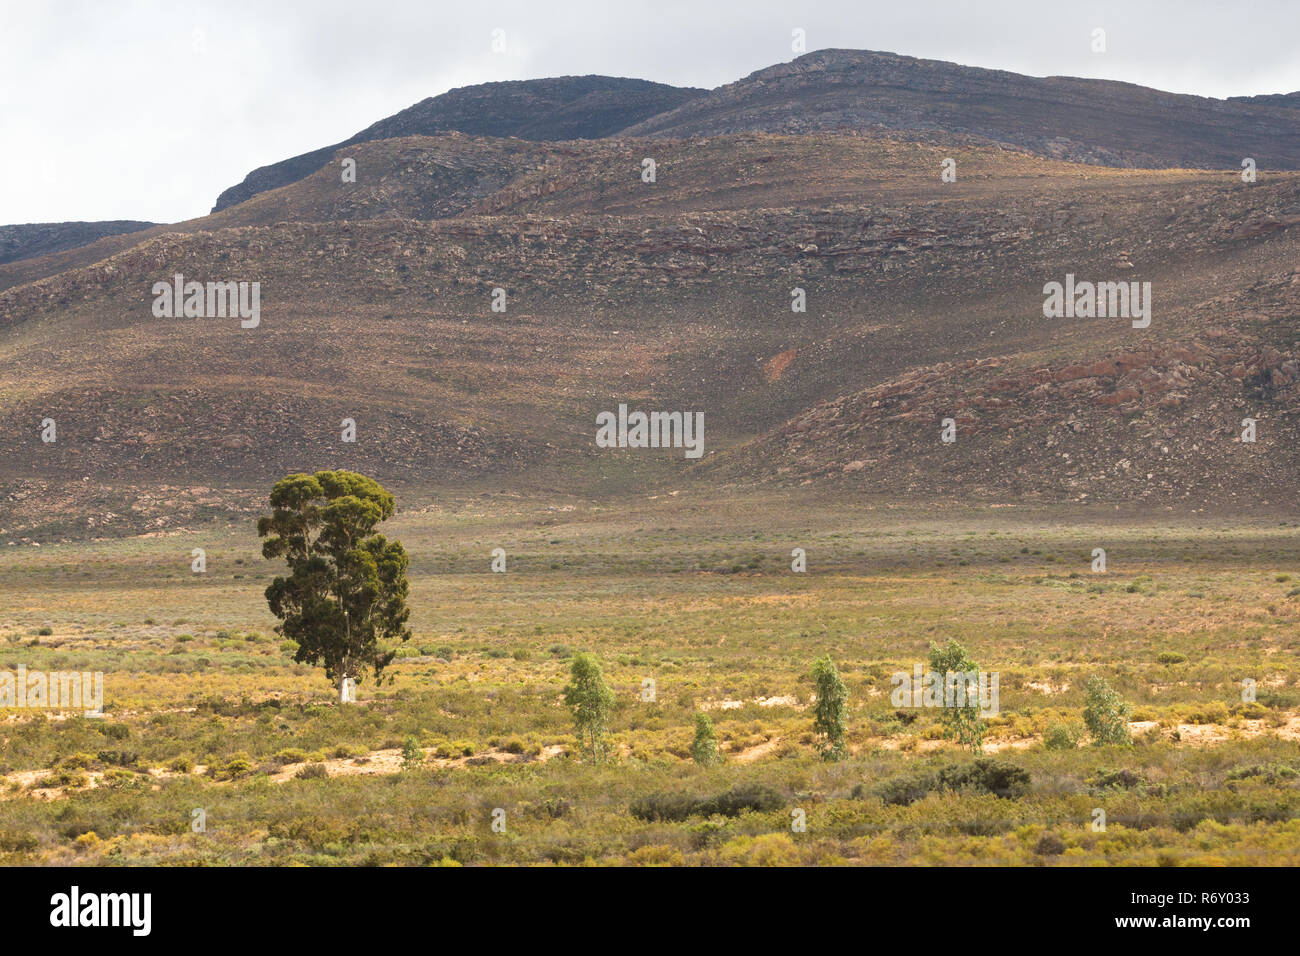 Karoo semi desert landscape with mountains in the background and a lone tree in the foreground Stock Photo